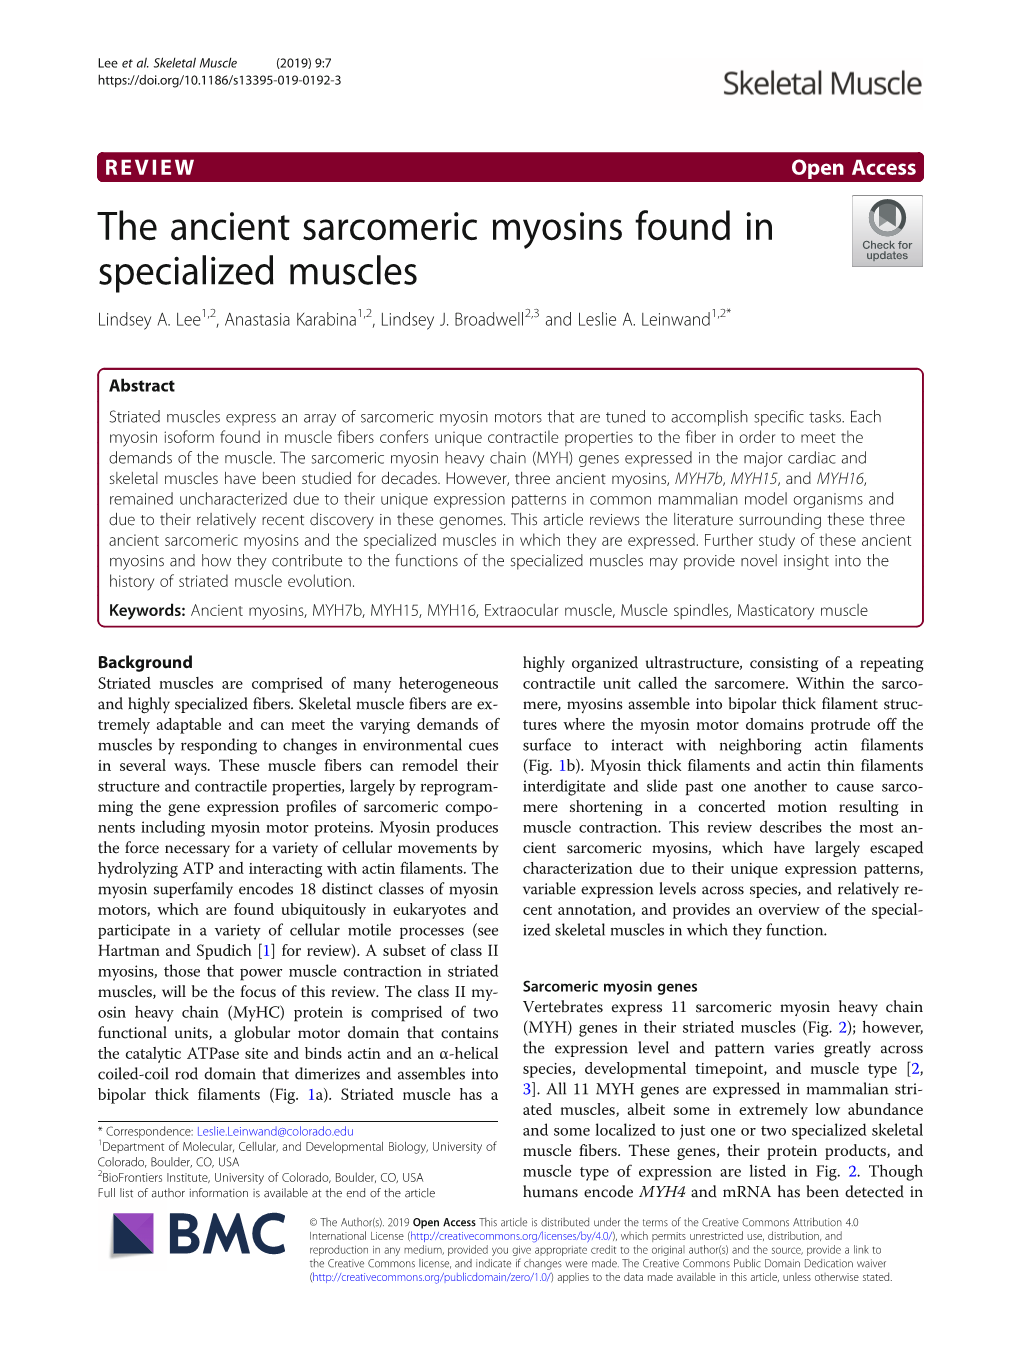 The Ancient Sarcomeric Myosins Found in Specialized Muscles Lindsey A